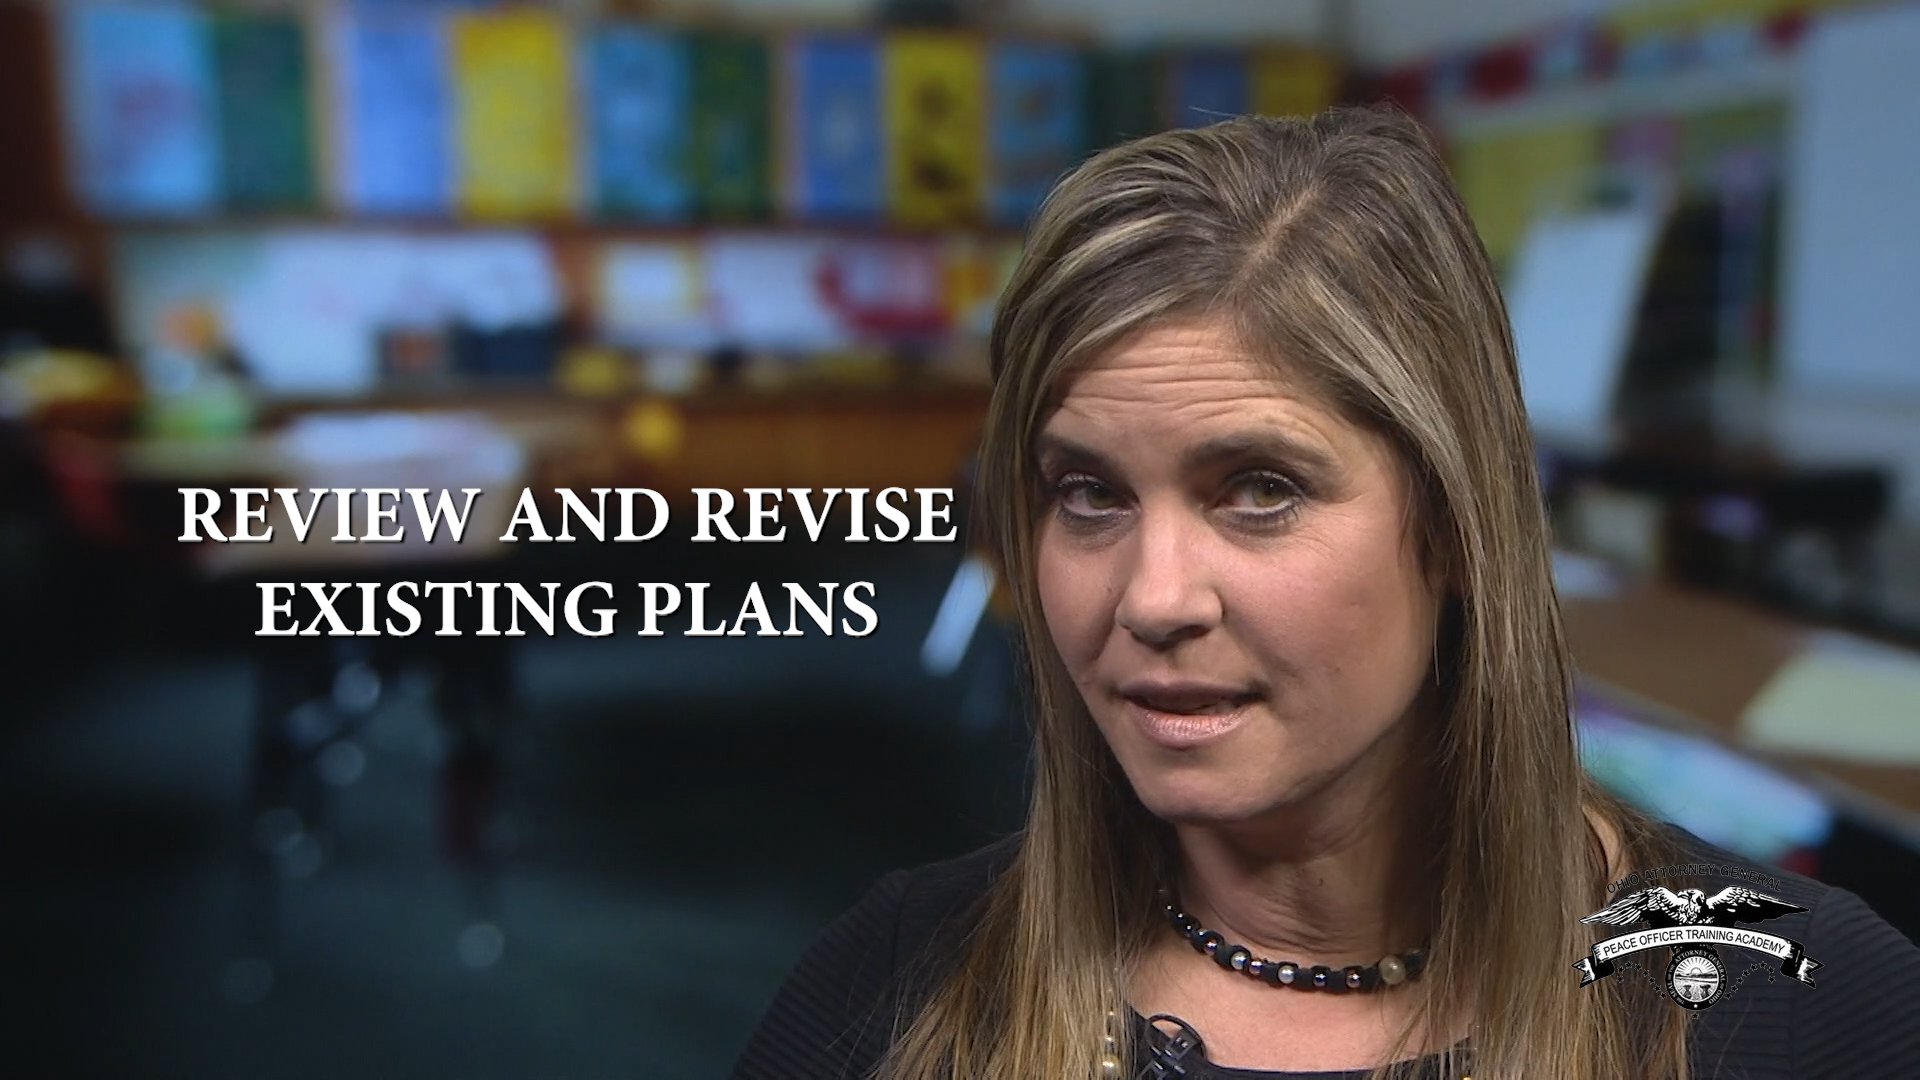 Video 25: Review and Revise Existing Plans